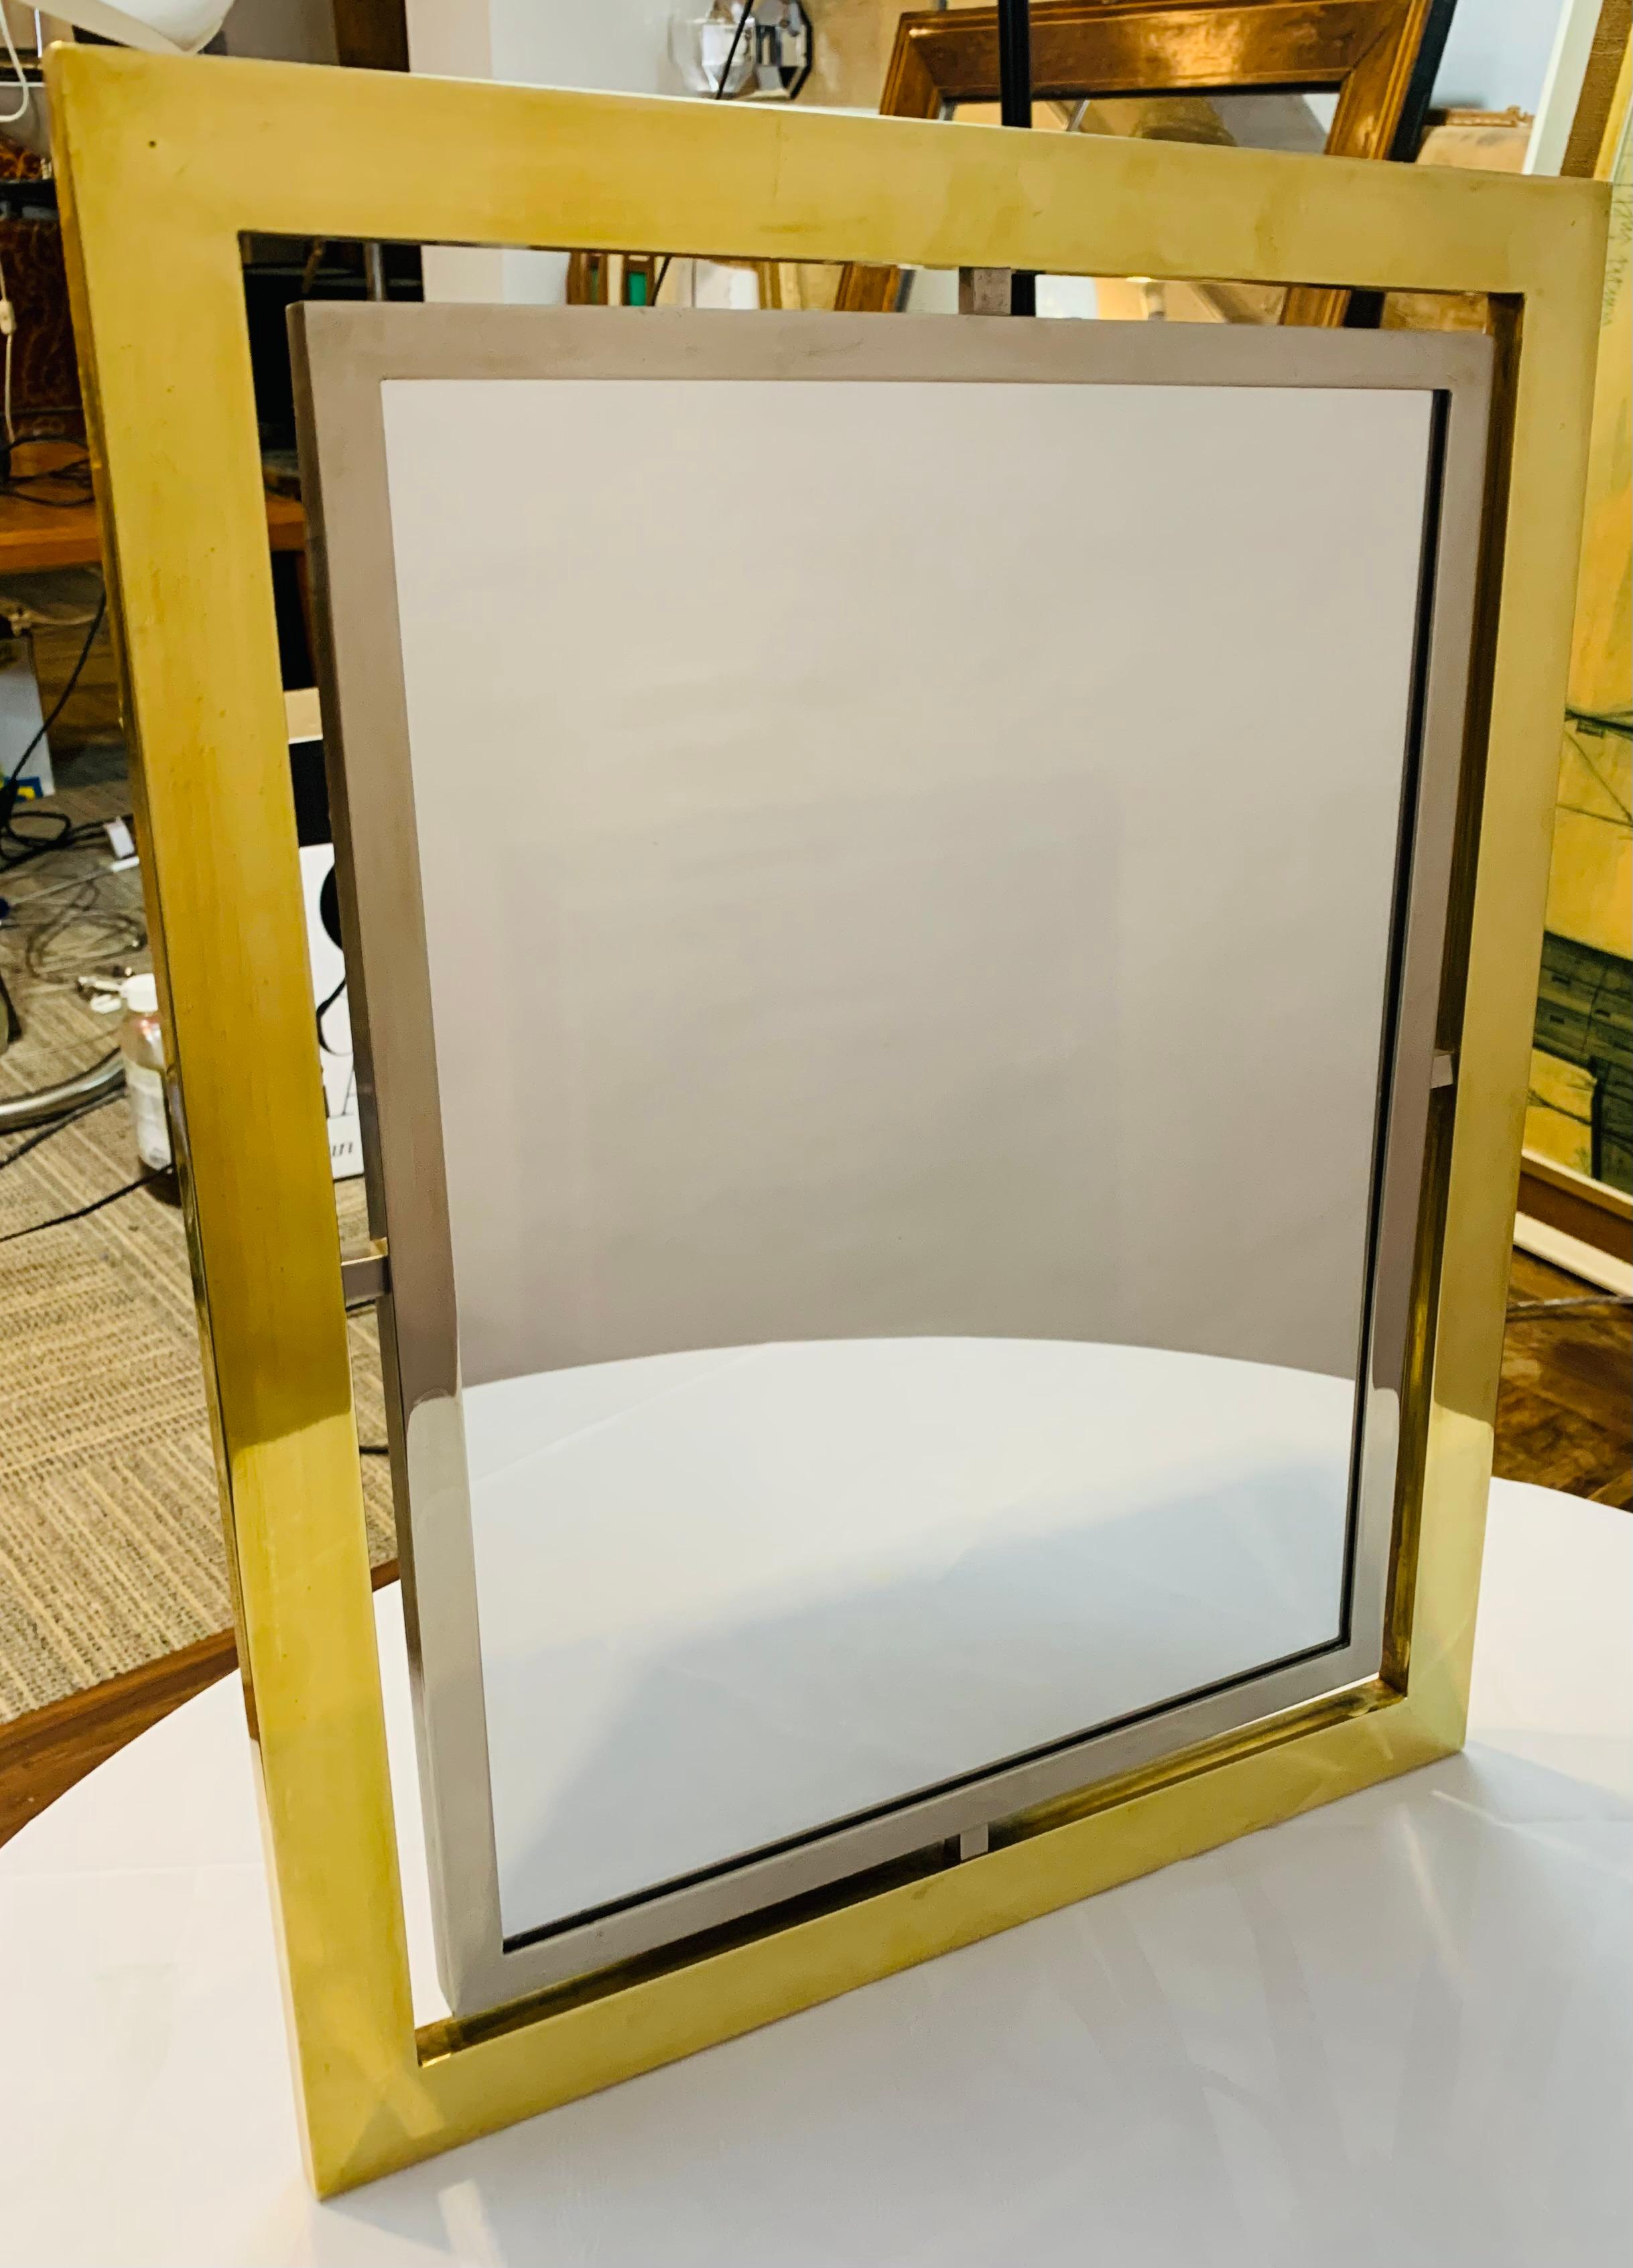 1970s Italian Romeo Rega rectangular free-standing dressing table mirror in polished brass and brushed steel. The mirror could easily be converted to a wall mirror if required. The mirror sits within a brushed steel frame which is suspended inside